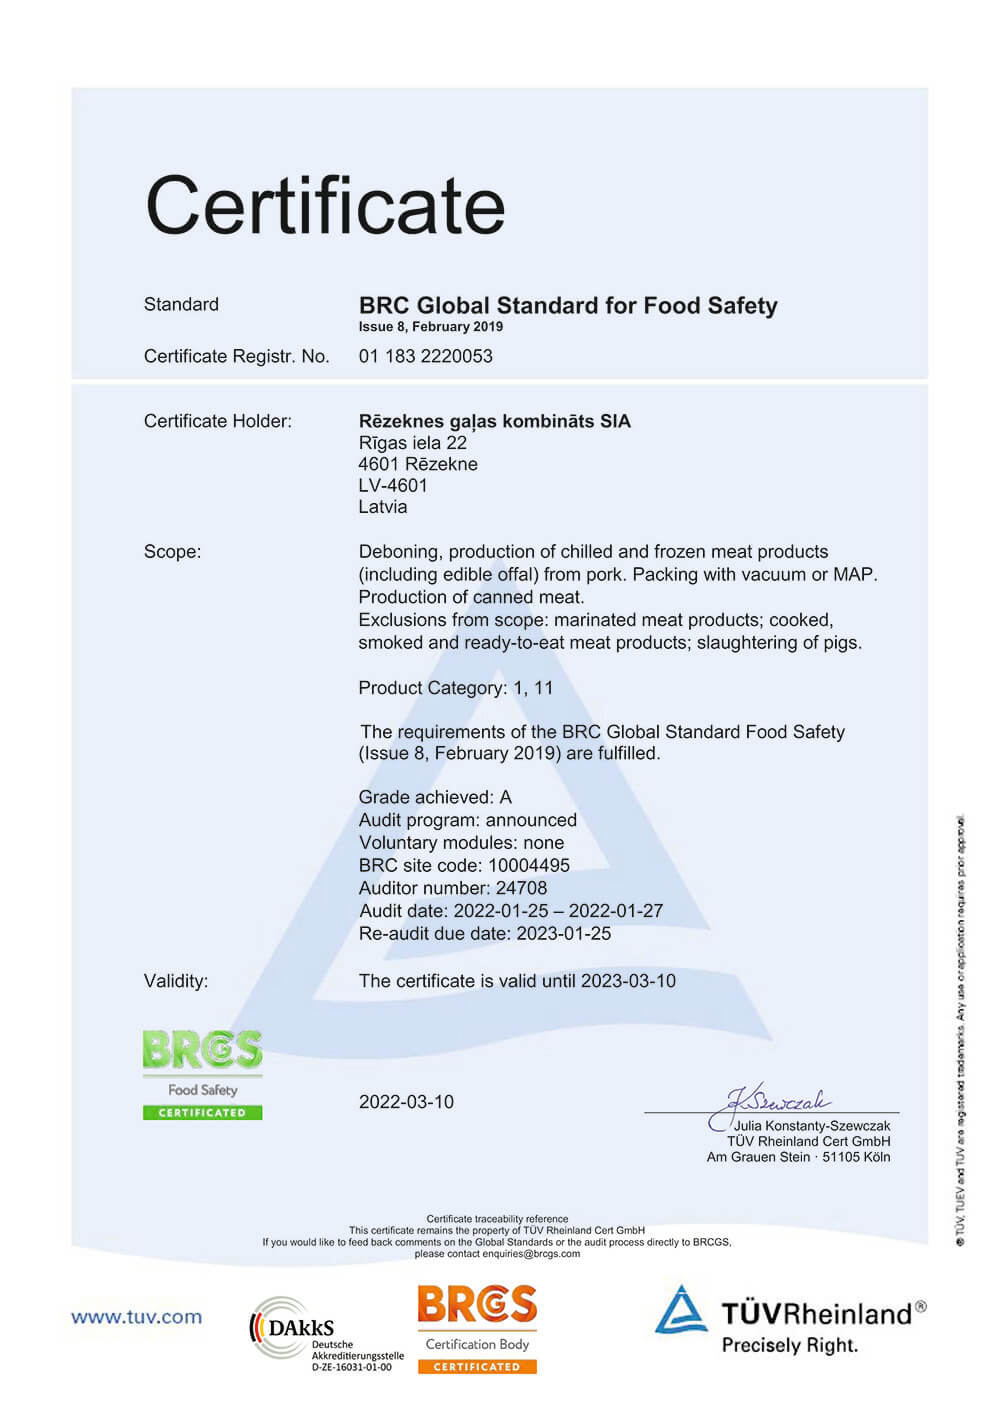 Energy Management System has been audited and meets the requirements of the ISO 50001:2018 standard.